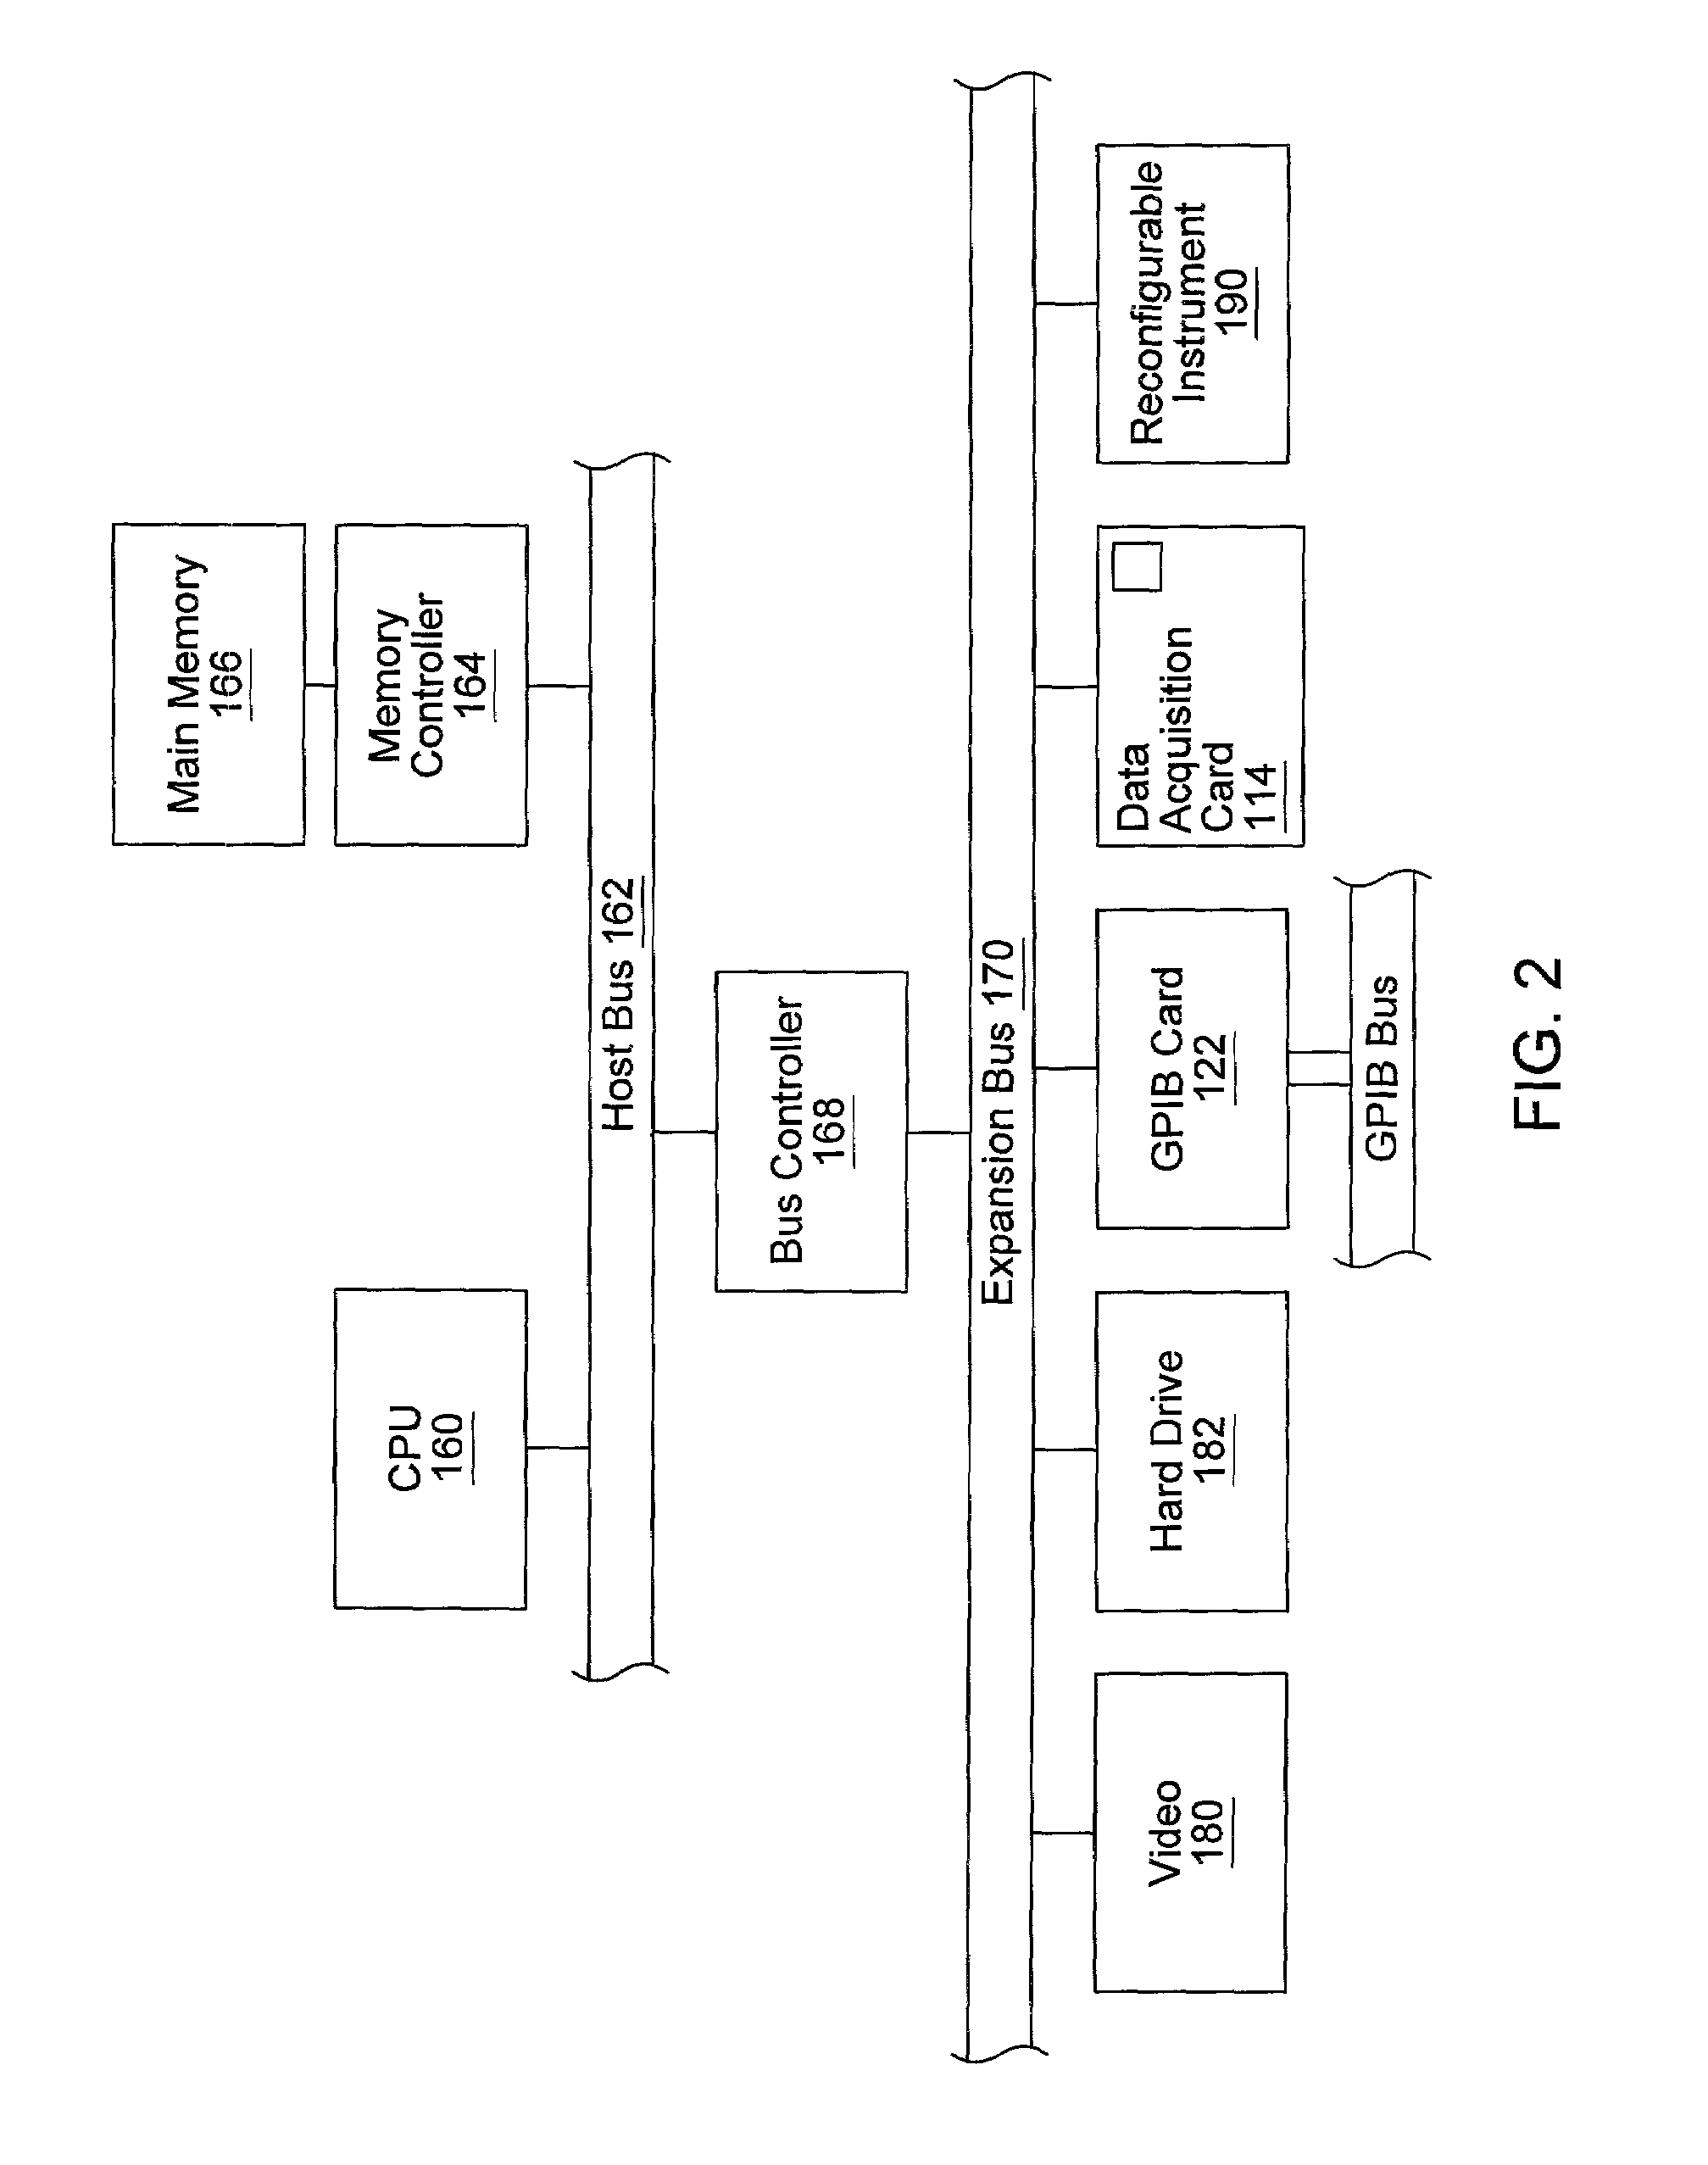 System and method for synchronizing execution of a batch of threads